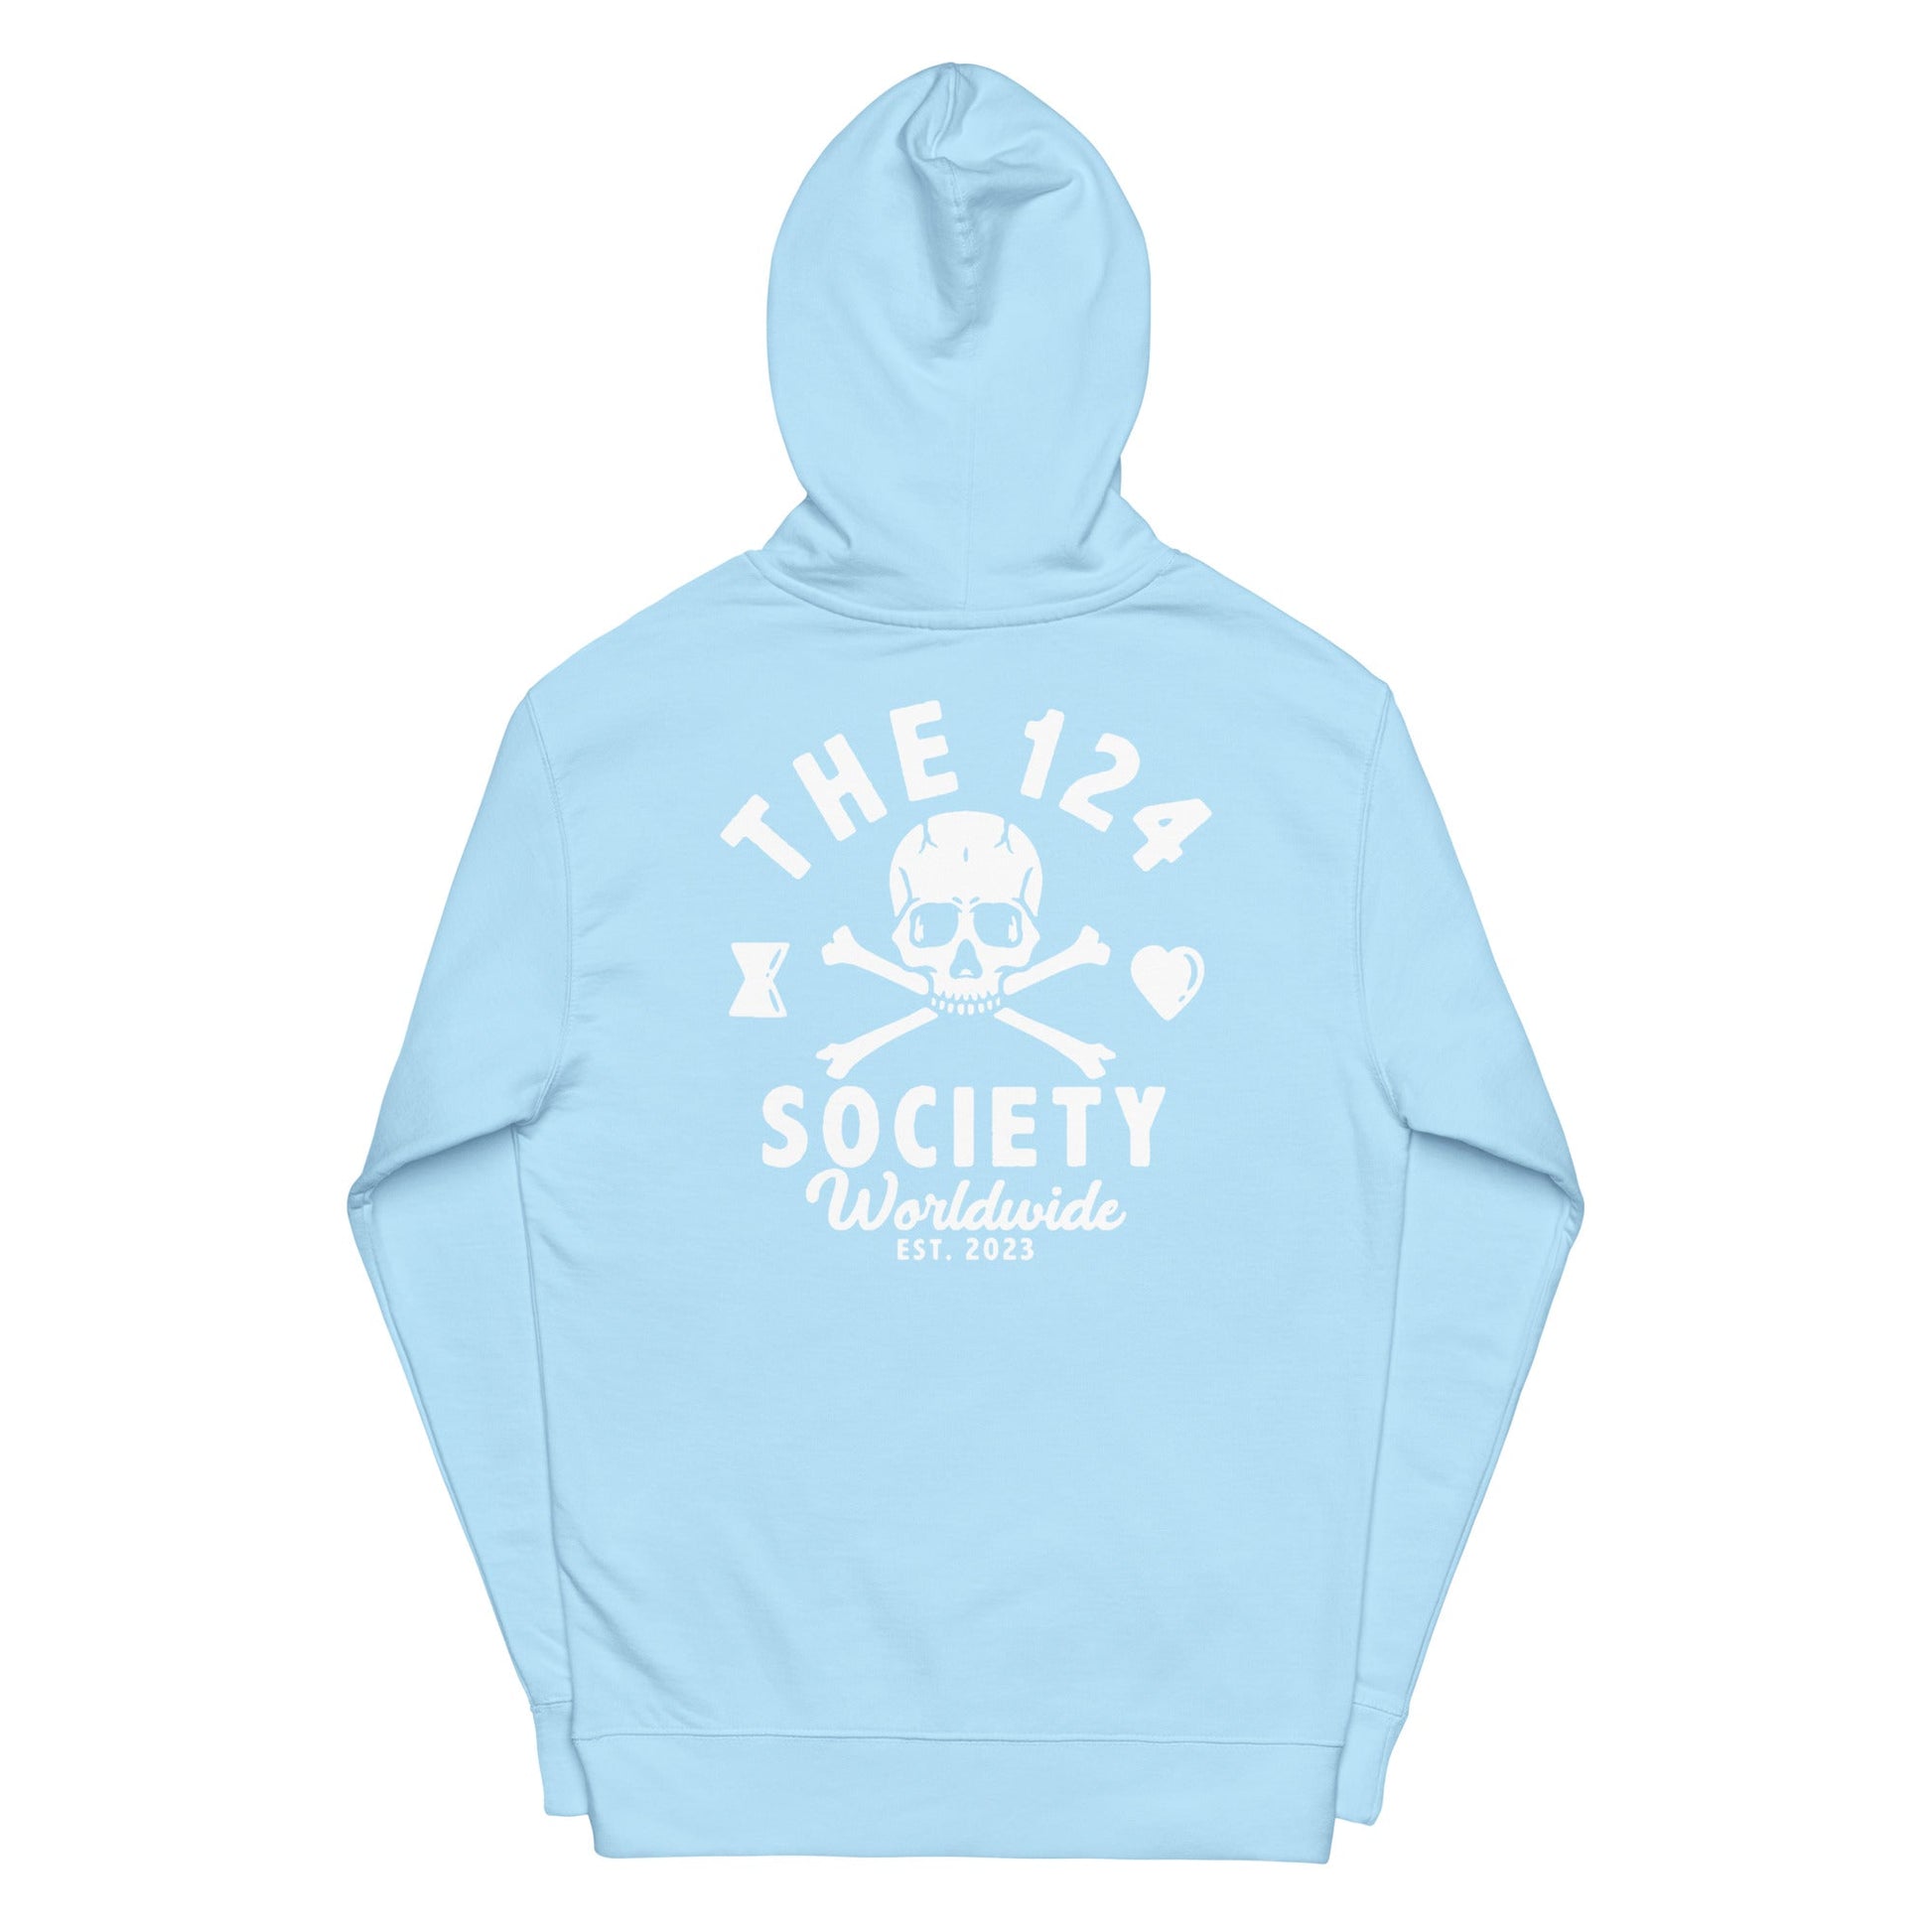 Skull and Crossbones Hoodie (White on Black) - The 124 Society